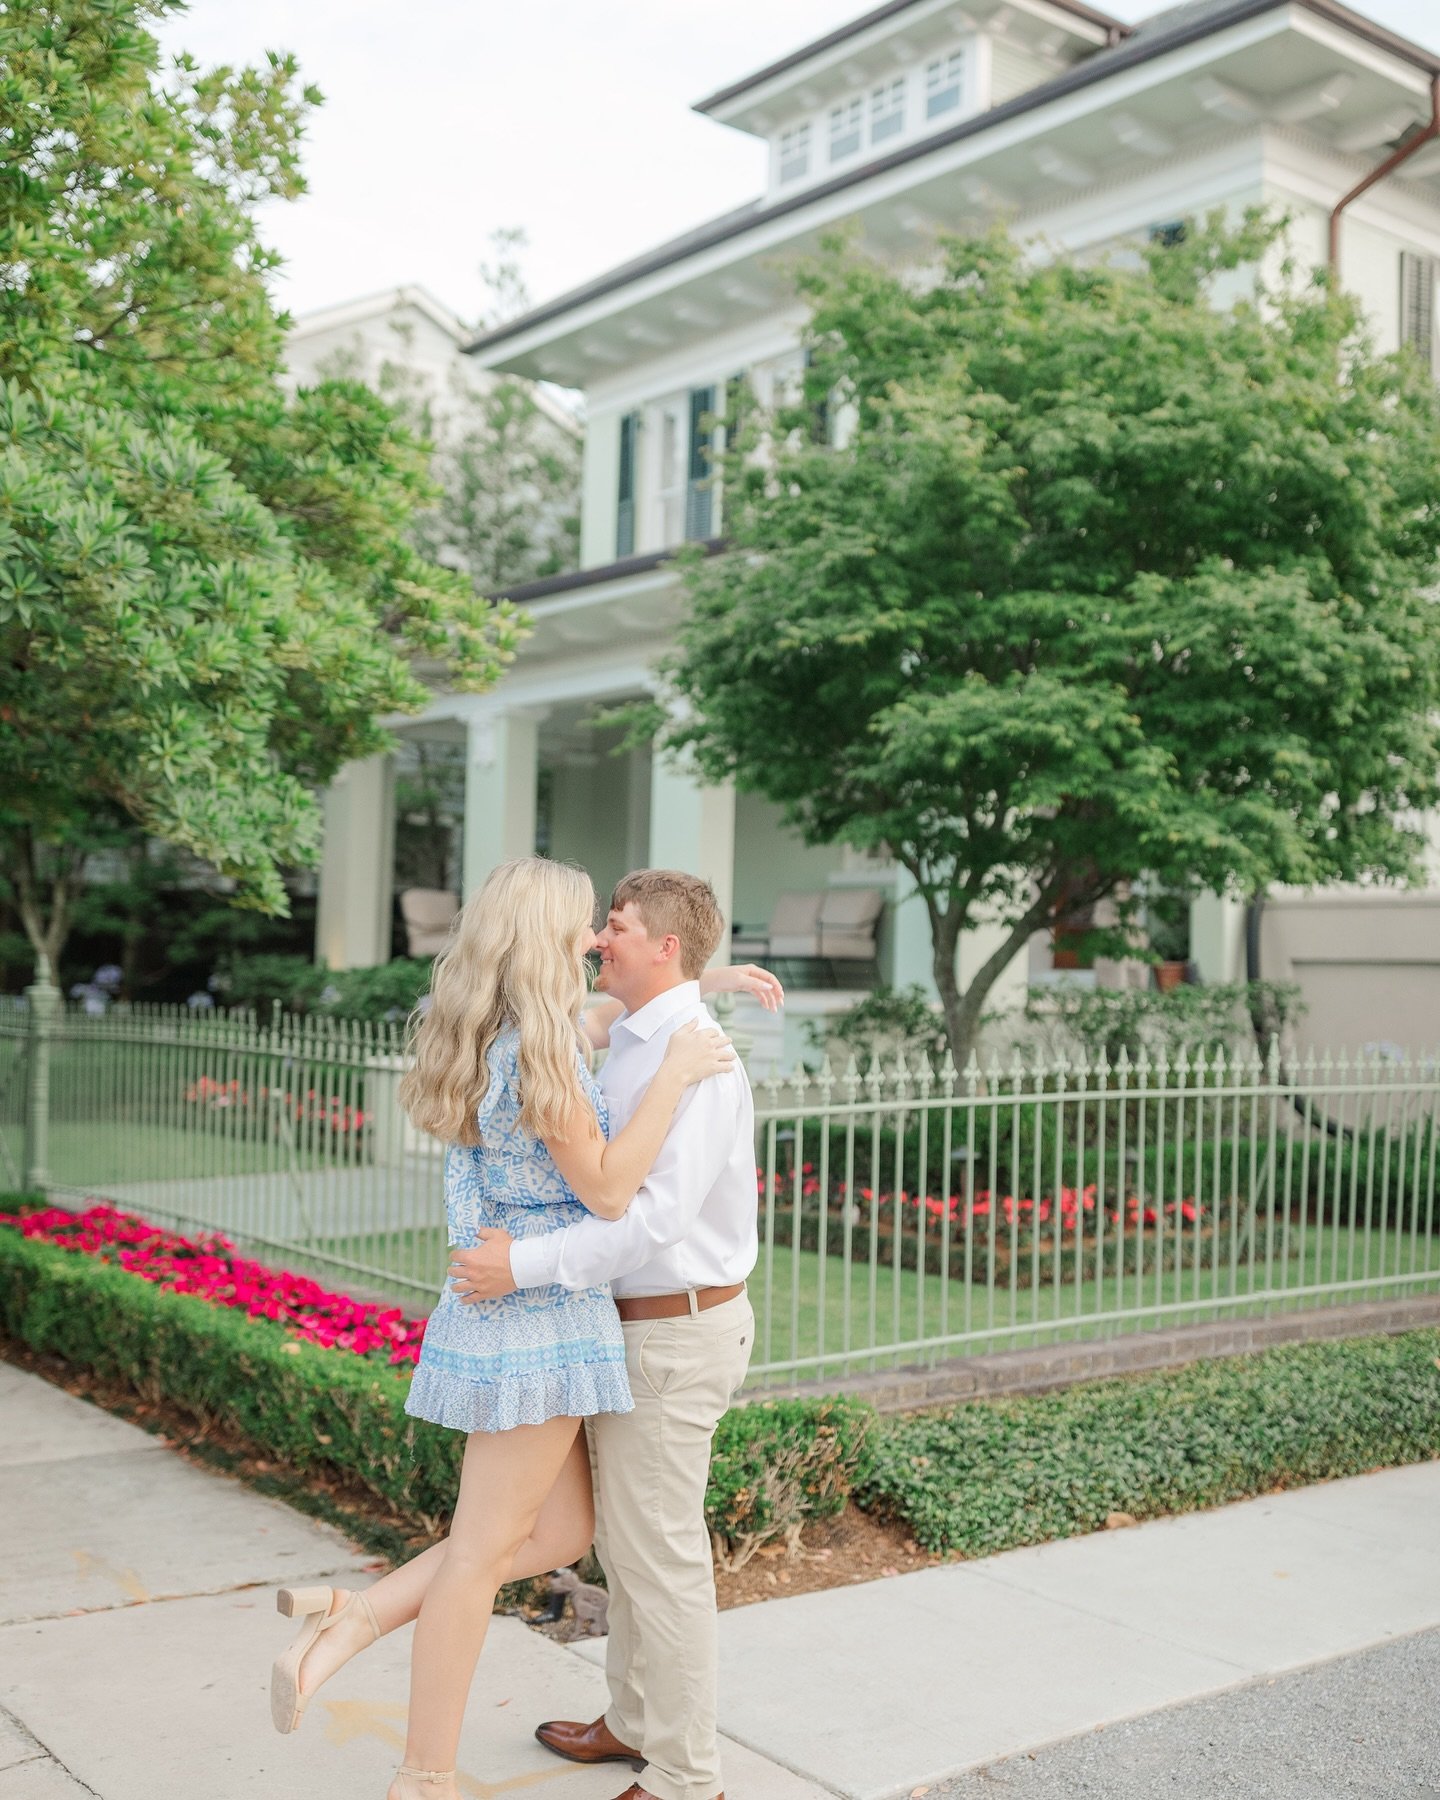 Strolling the streets of the Garden District and capture the sweetness between Lauren and Landry 🥰

Can&rsquo;t wait for these two to tie the knot!

&bull;
&bull;

#louisianaweddingphotographer #louisianaphotographer #louisianaphotography #neworlean